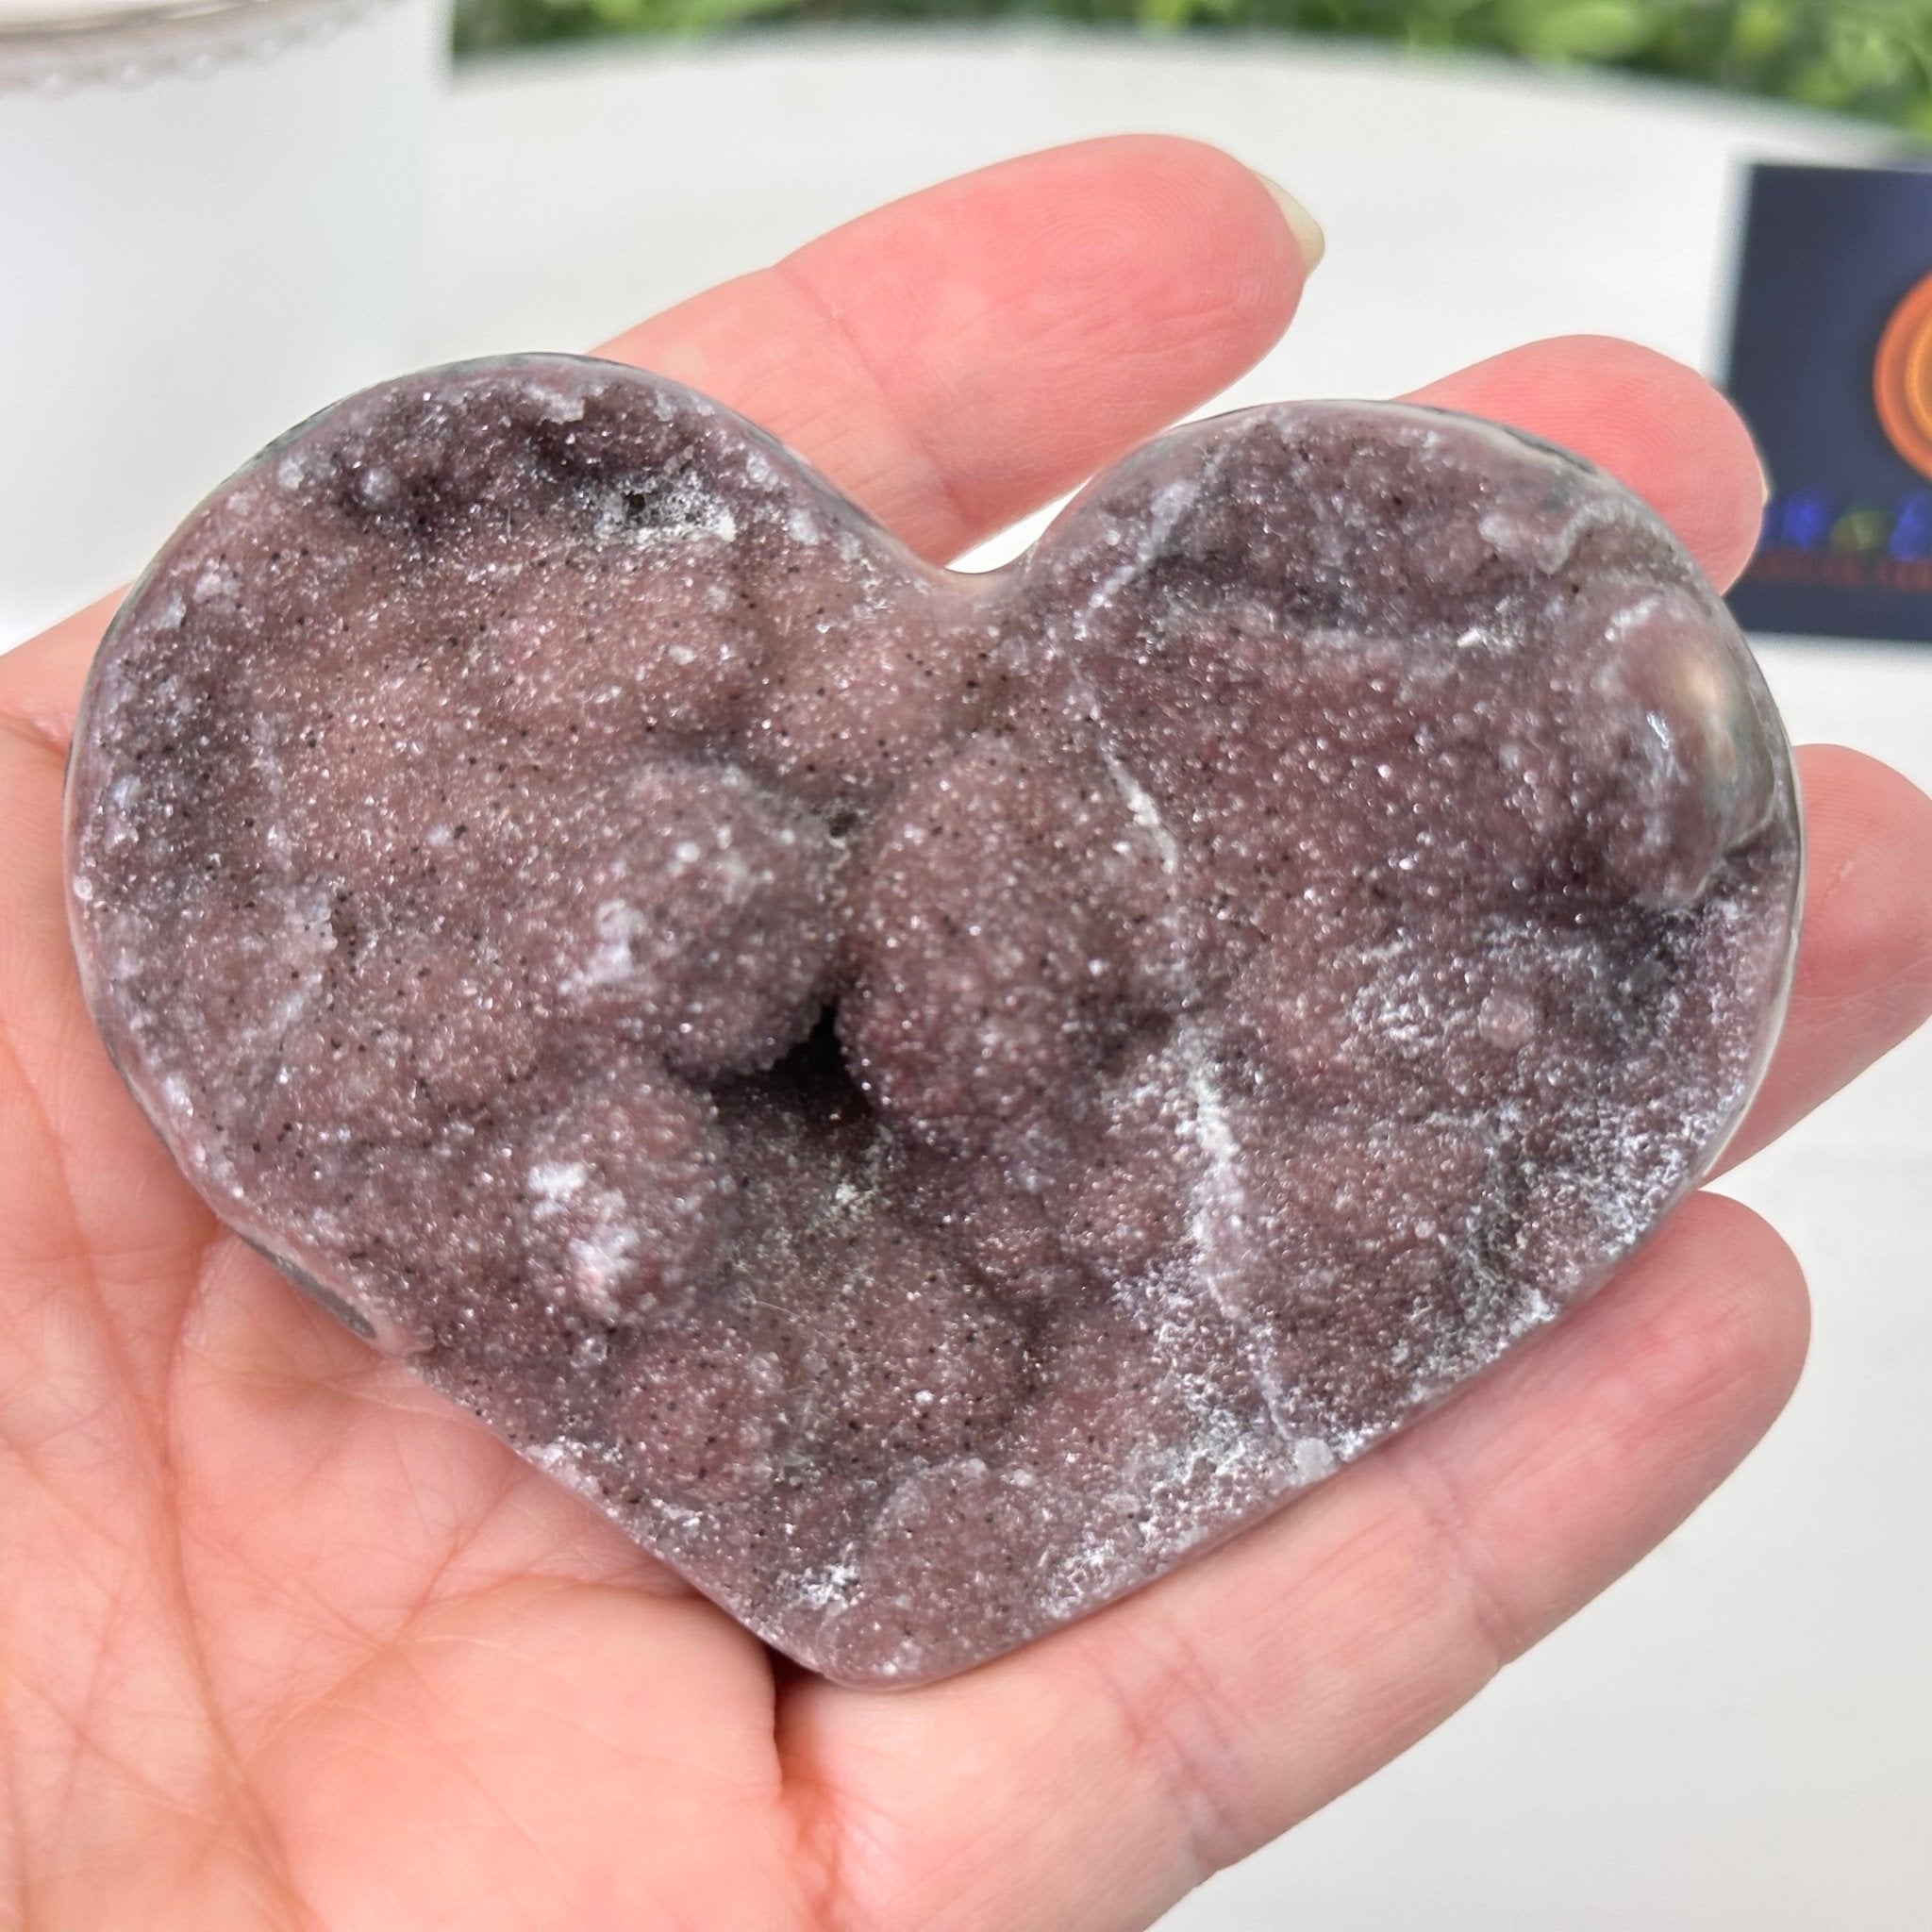 Extra Plus Quality Amethyst Heart Geode on an Acrylic Stand, 0.32 lbs & 2.4" Tall #5462-0027 by Brazil Gems - Brazil GemsBrazil GemsExtra Plus Quality Amethyst Heart Geode on an Acrylic Stand, 0.32 lbs & 2.4" Tall #5462-0027 by Brazil GemsHearts5462-0027